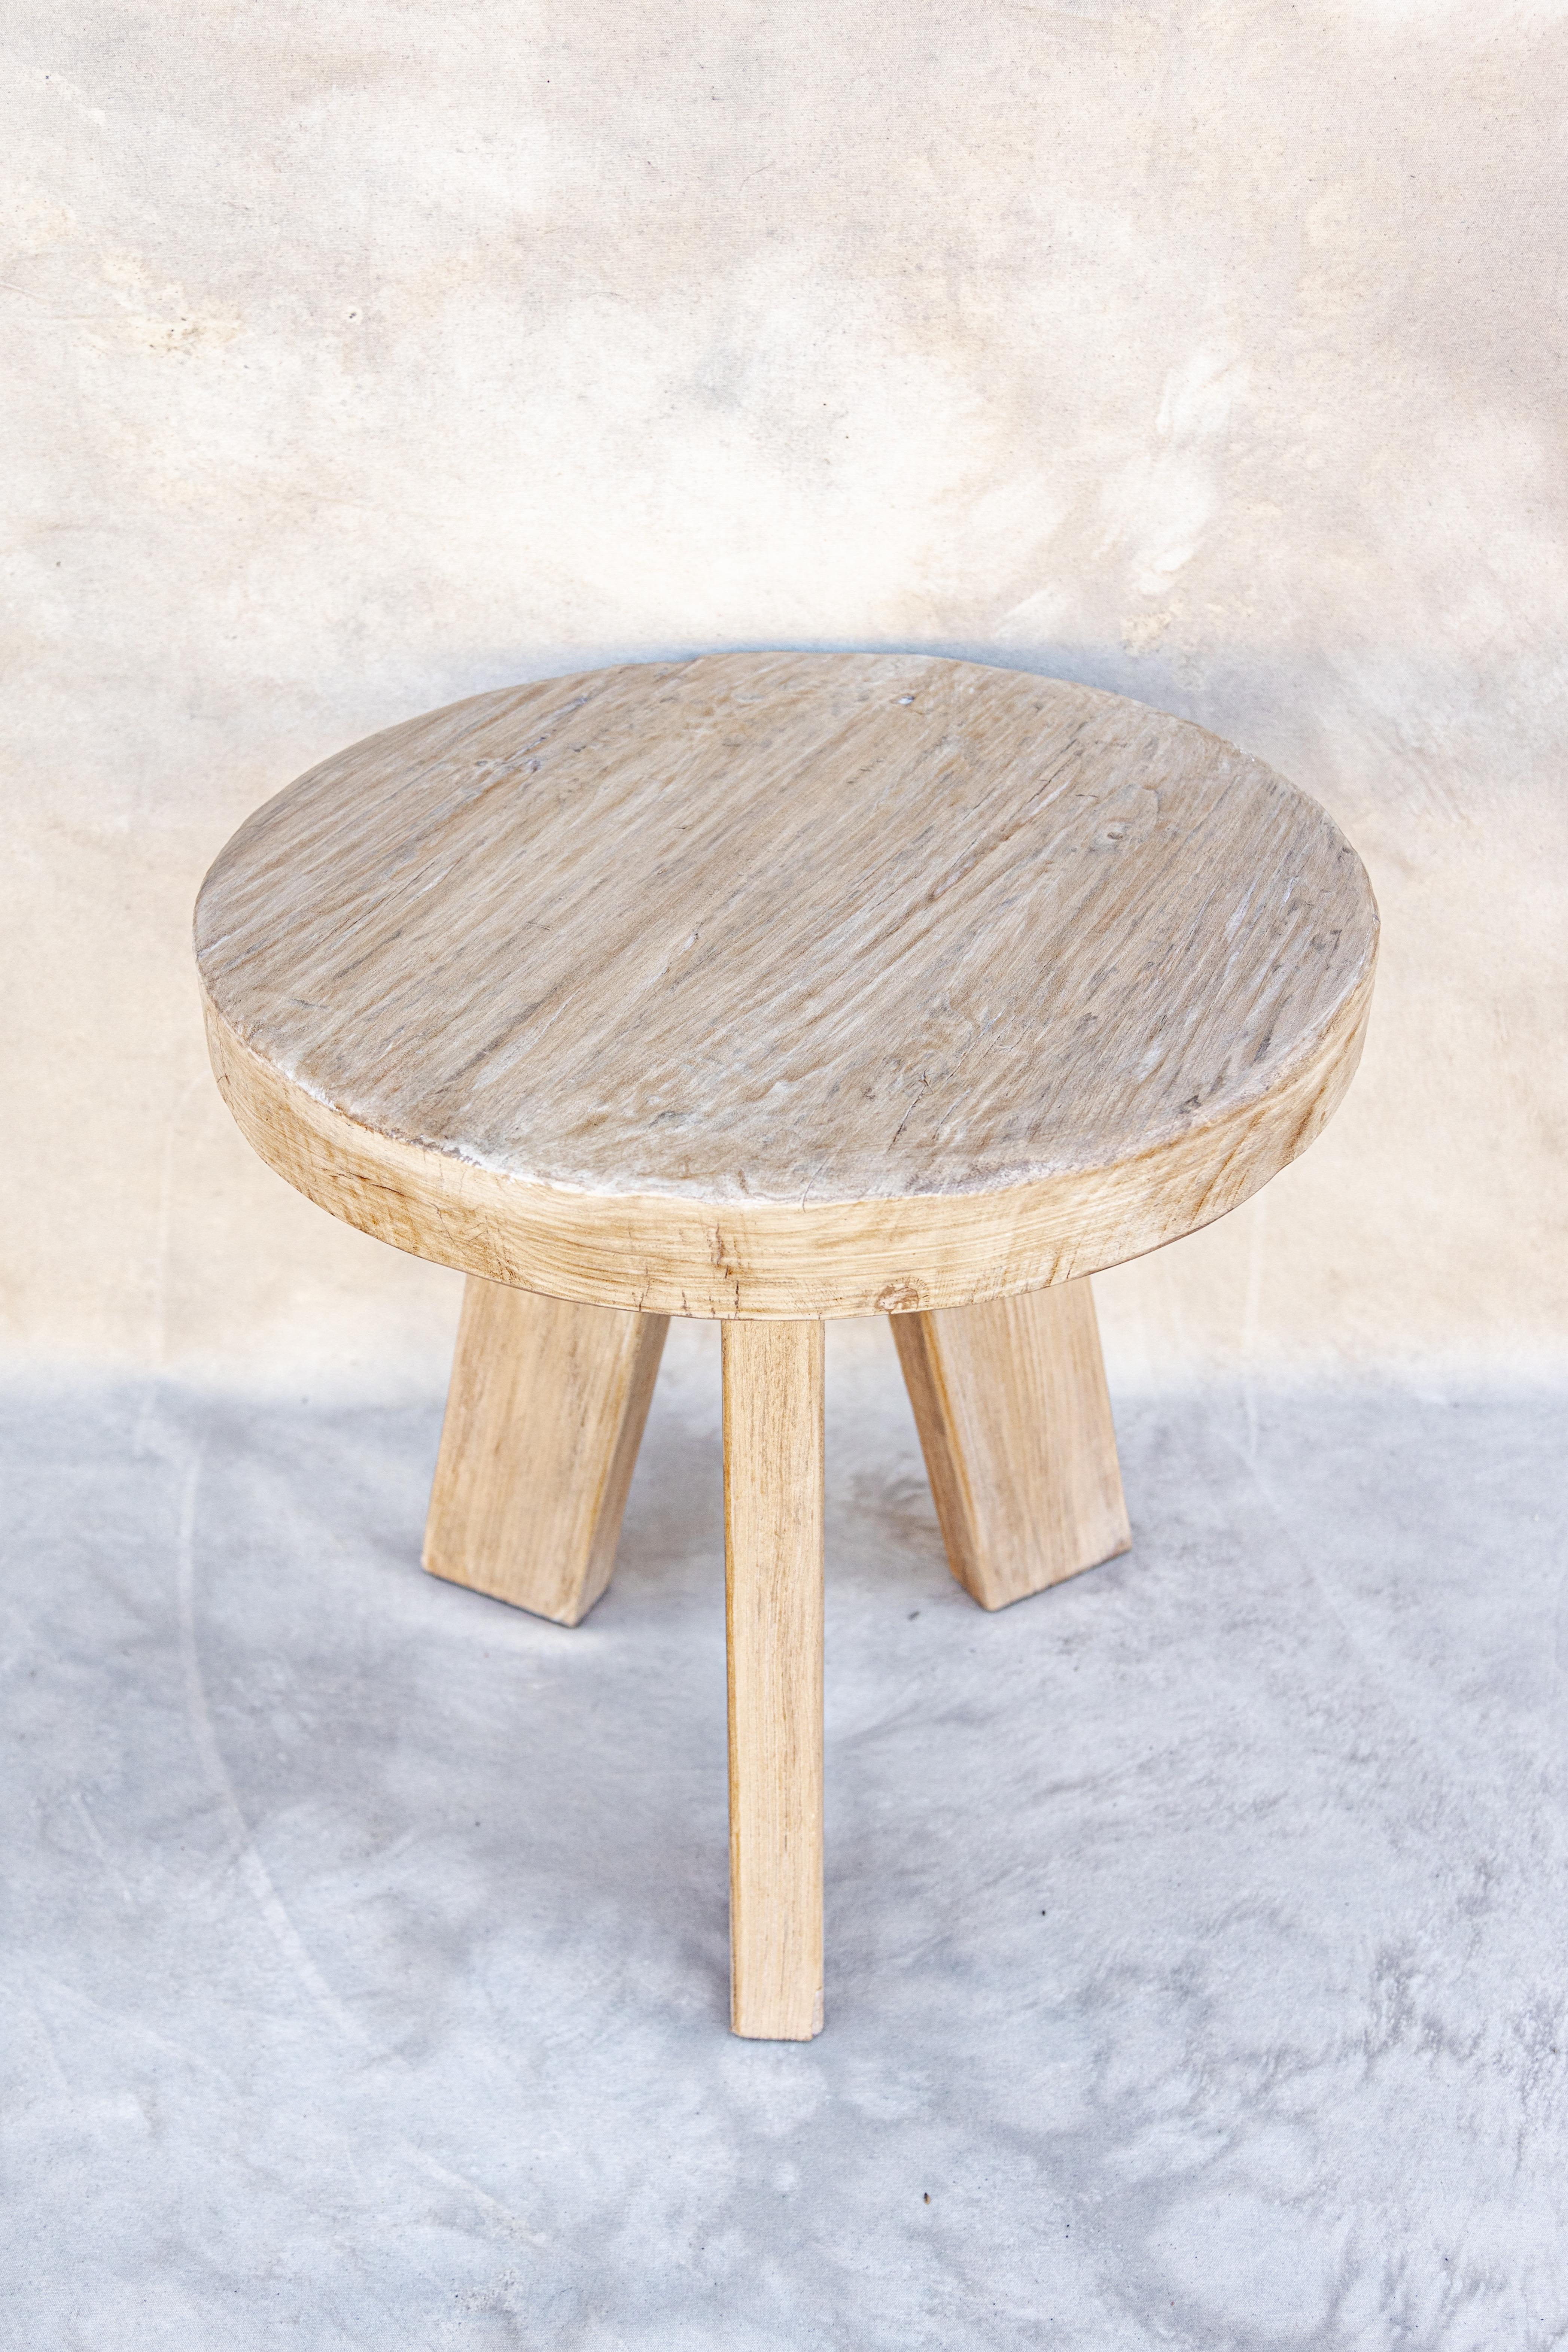 Introducing our Georgia side table. Crafted from vintage elm wood, sourced throughout Europe and Asia. Pair her with our Georgia coffee table or style her separately. Beautiful in a living room space or bedroom. We love her textures and natural wood